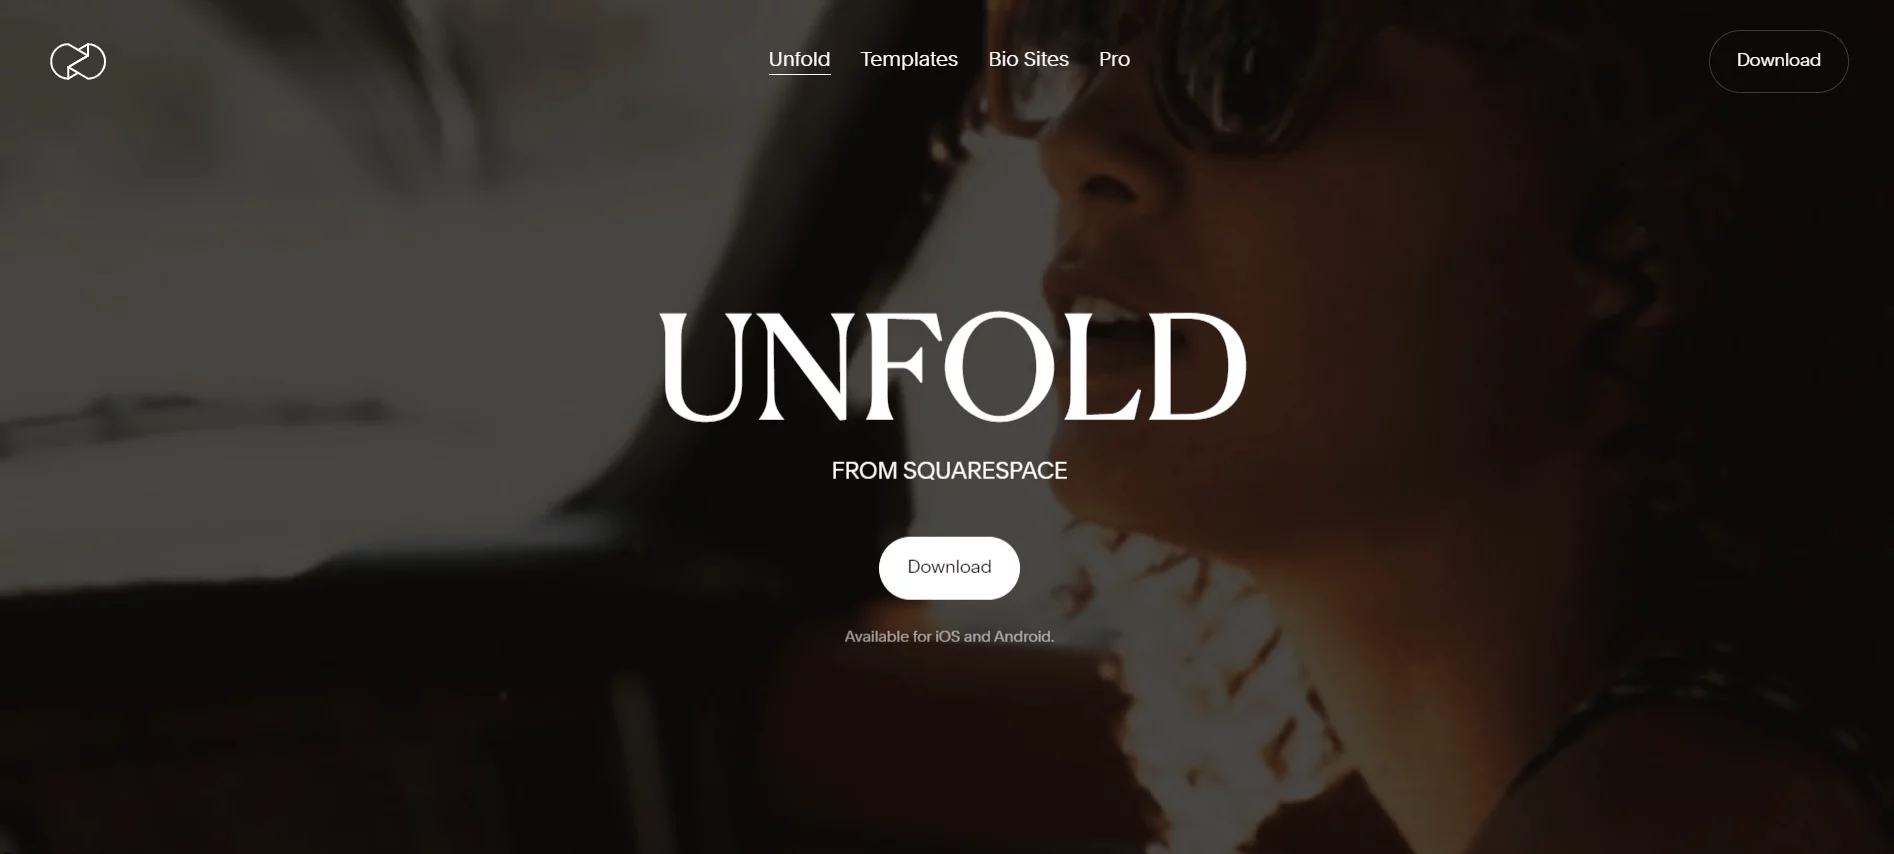 Homepage of Unfold featuring a silhouette of a woman wearing sunglasses, set against a dark background, highlighting the app's ability to enhance storytelling.